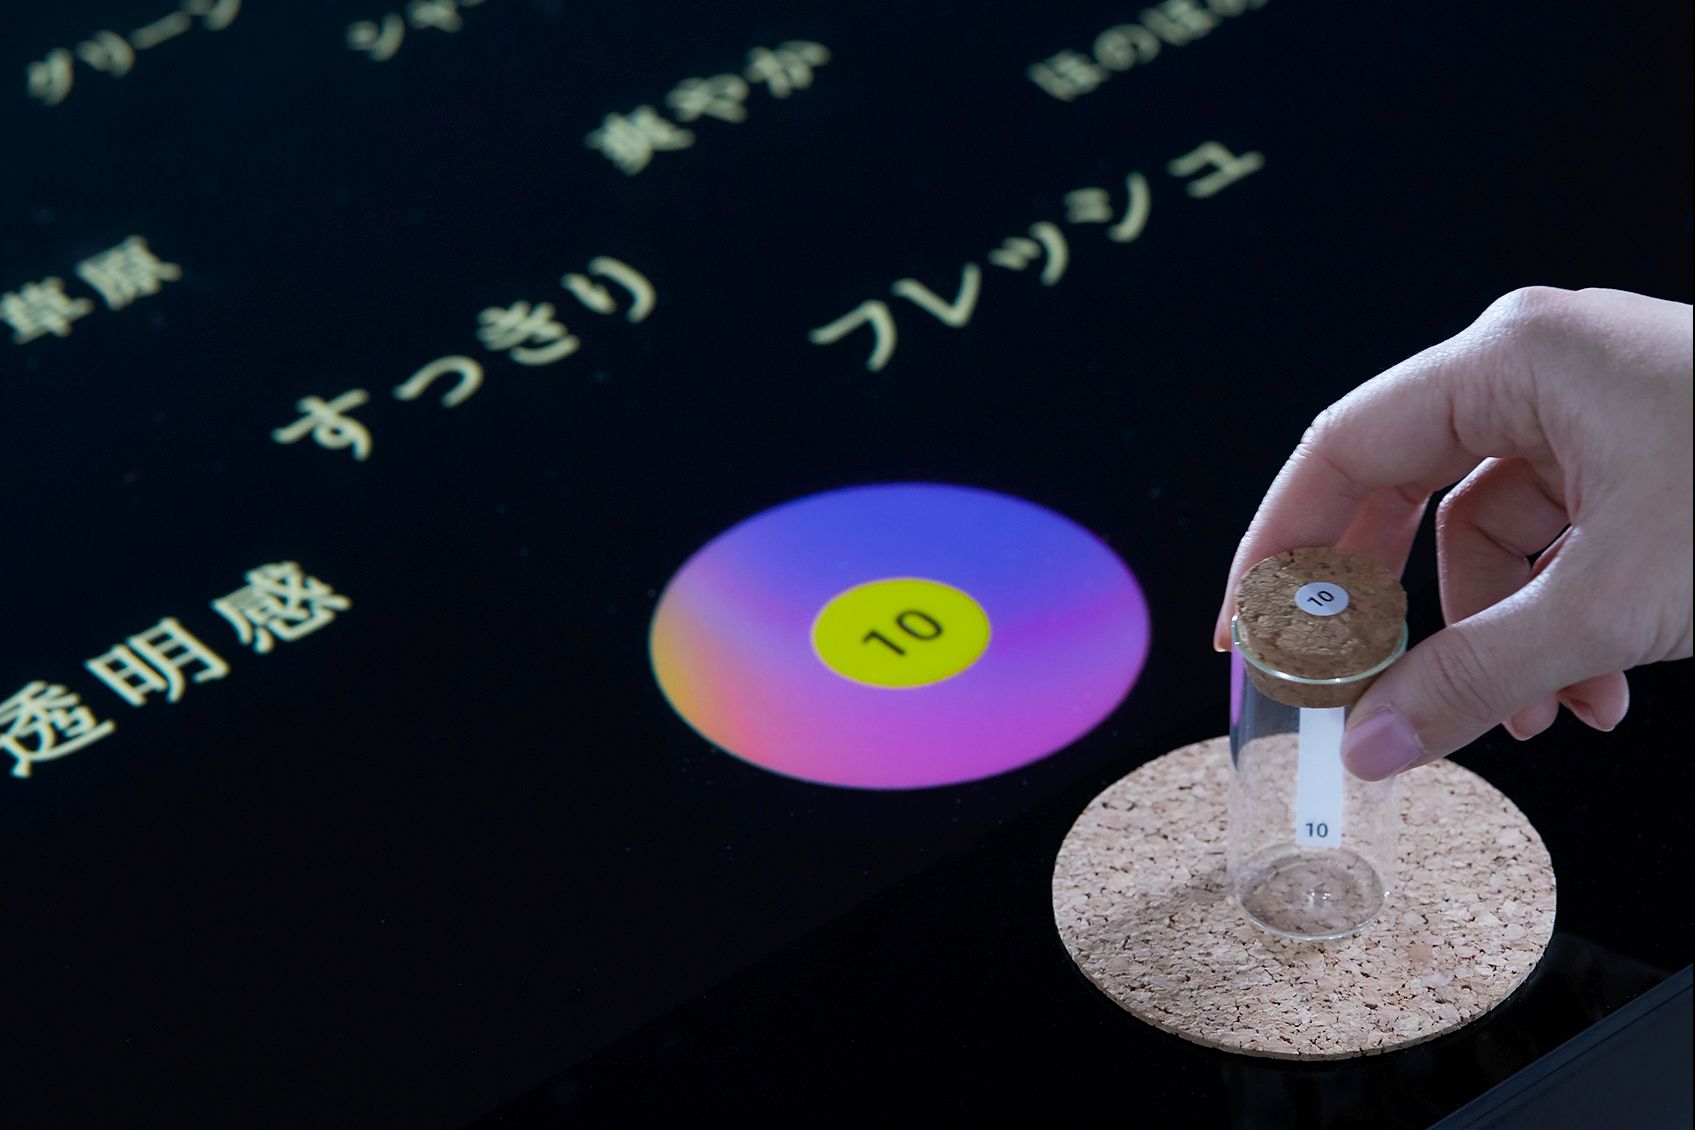 KAORIUM device AI system for translating scent into words